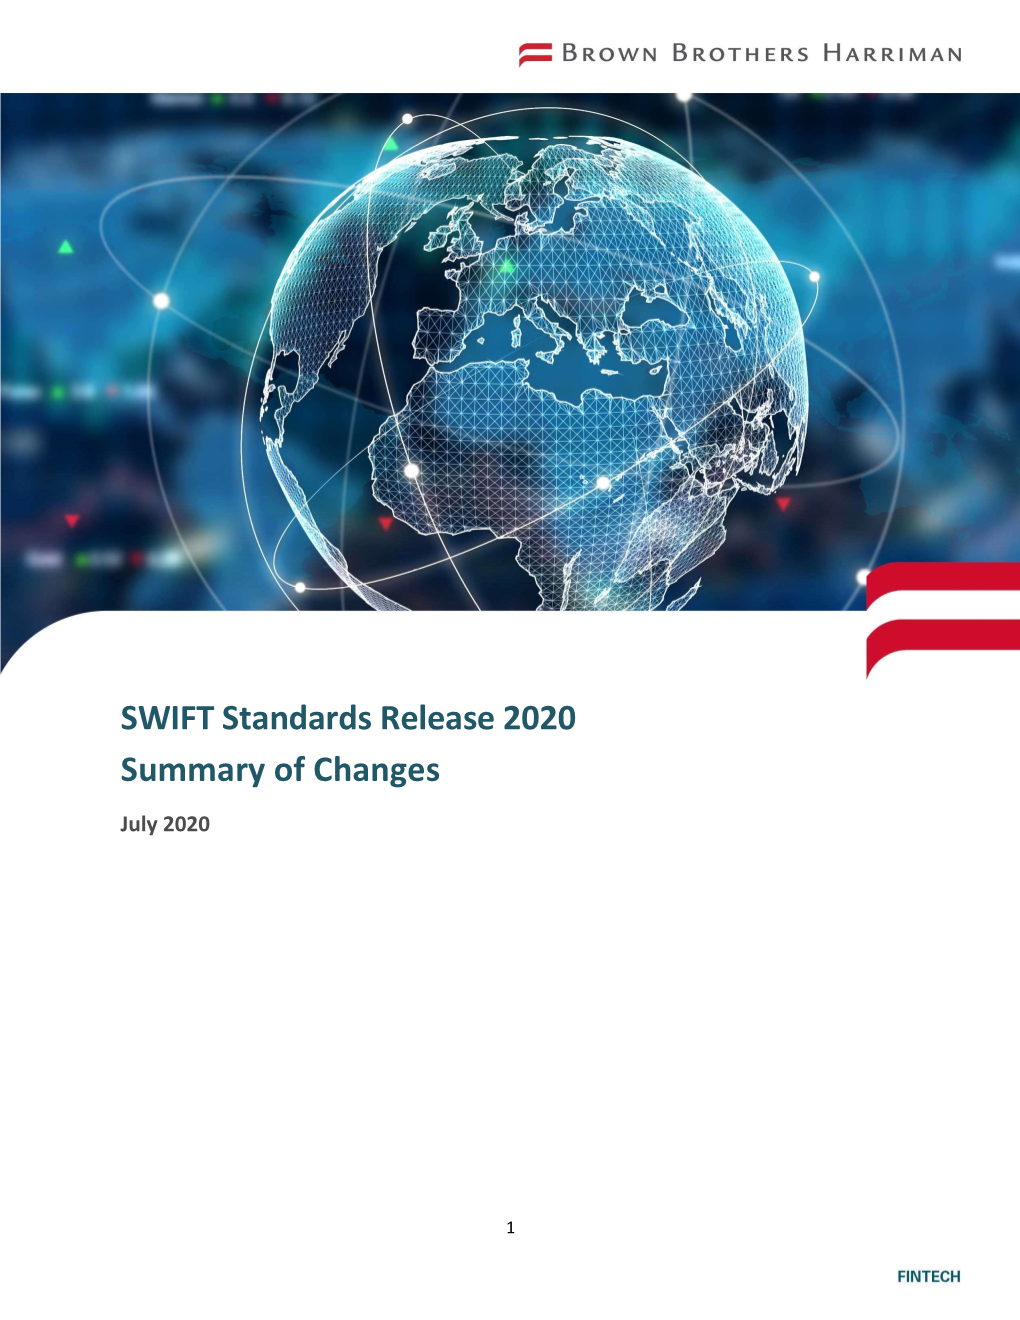 SWIFT Standards Release 2020 Summary of Changes